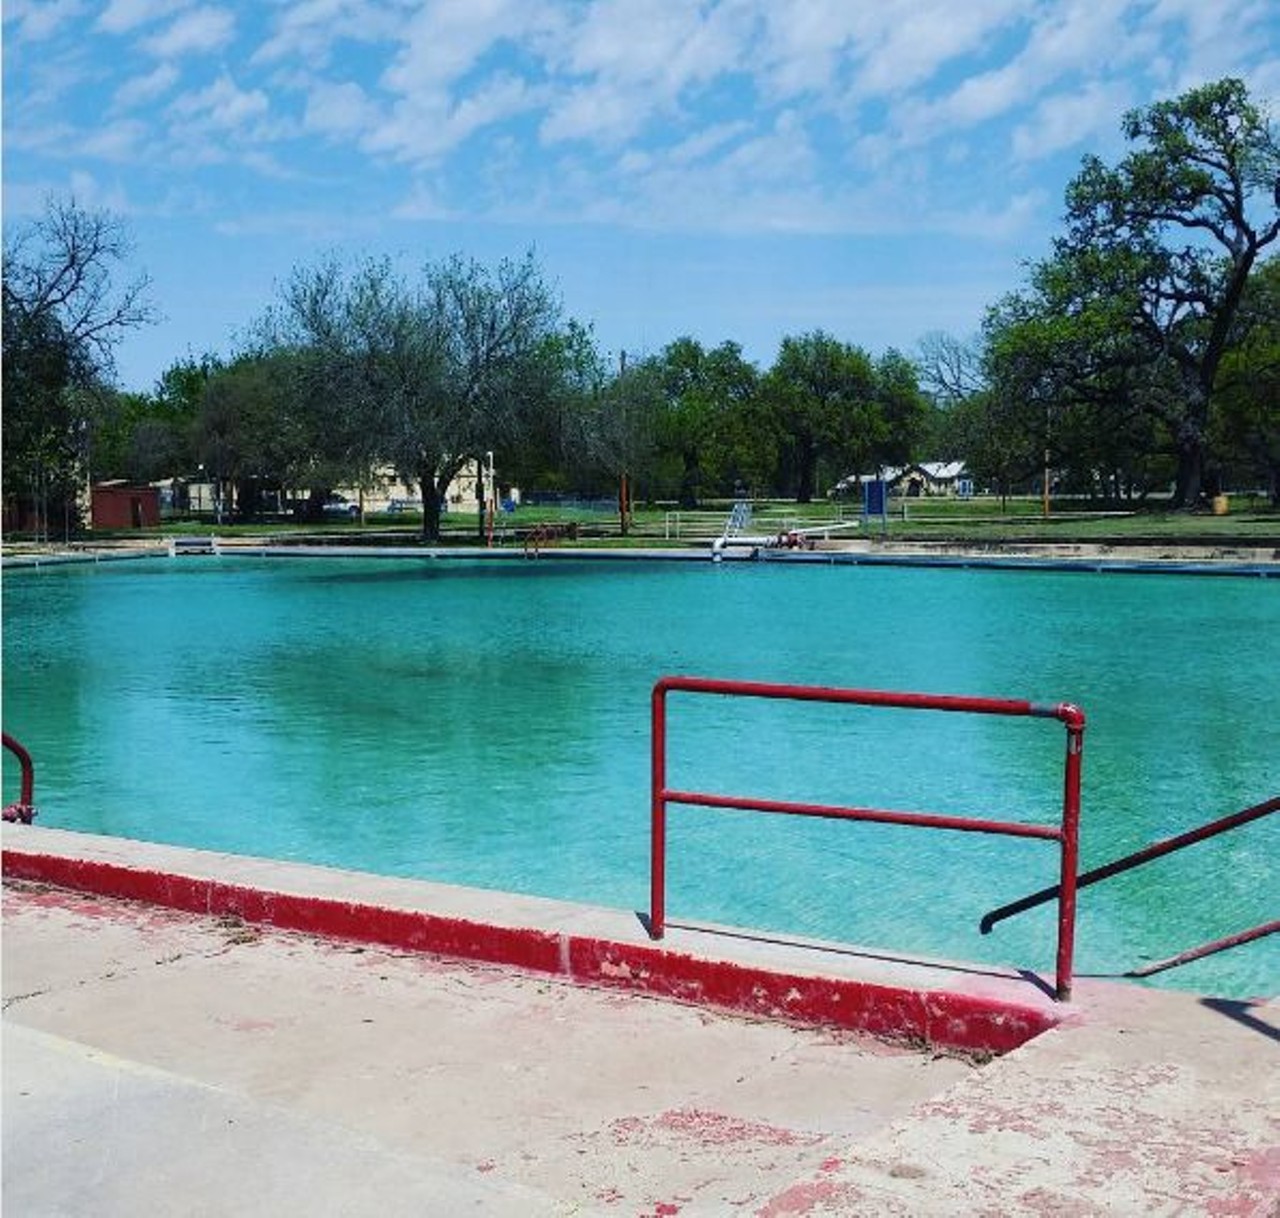 Fort Clark Springs
300 US-90, Brackettville, (830) 563-2493, fortclark.com
Clear waters, full coolers, can&#146;t lose.
Photo via Instagram, the_maryann